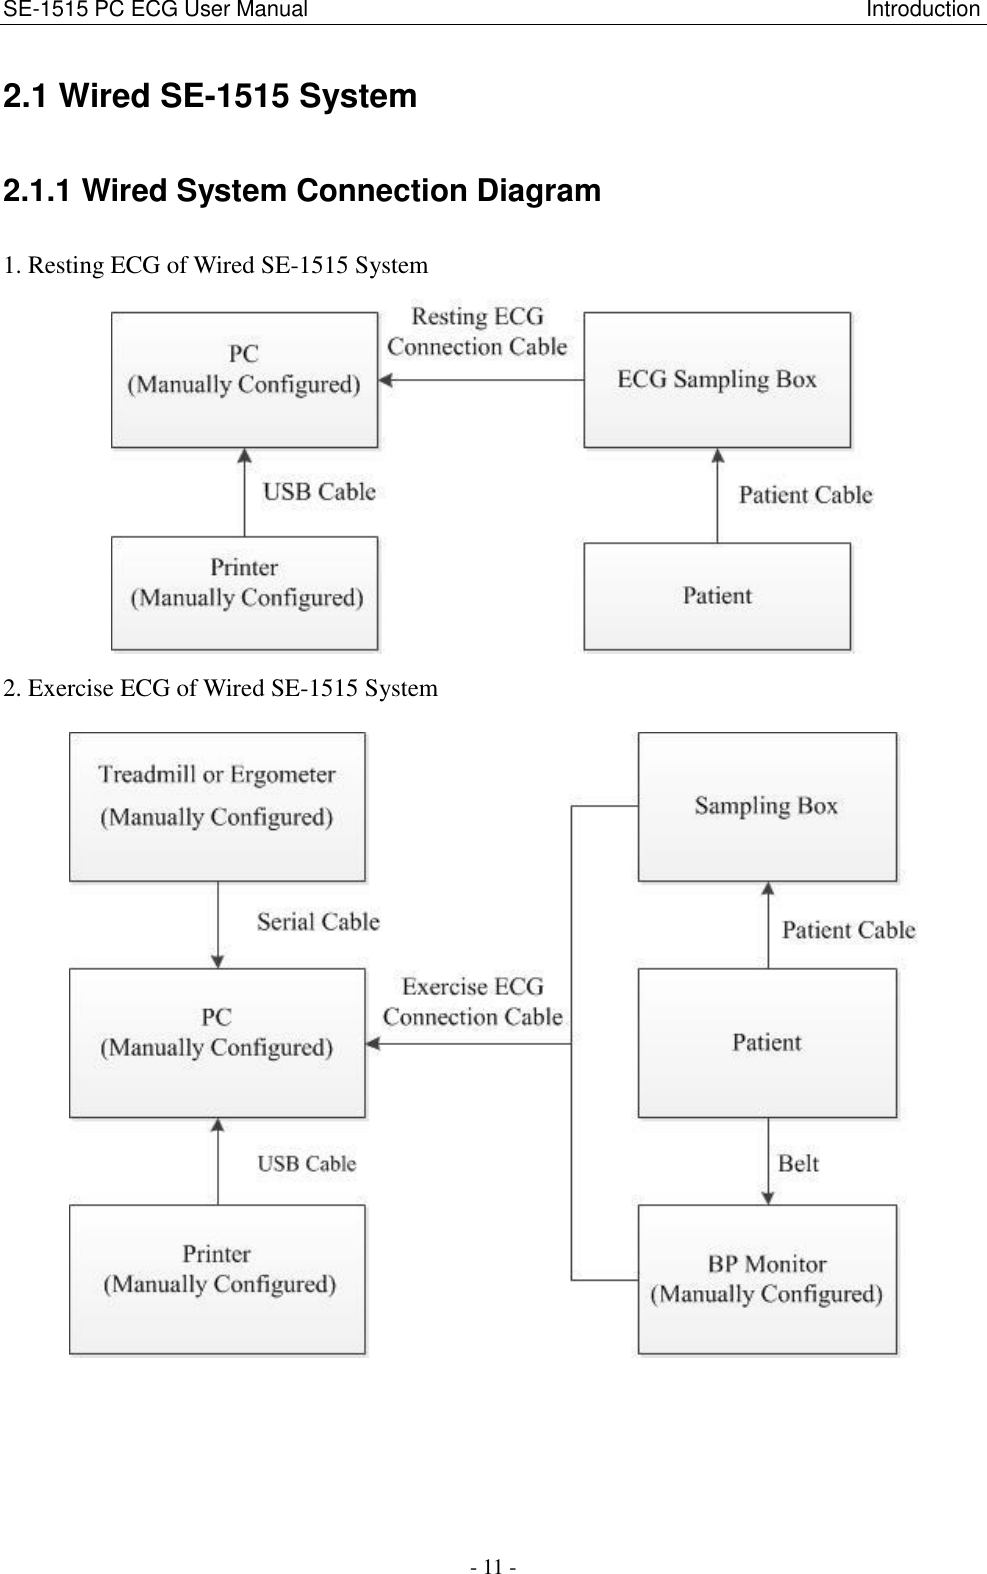 SE-1515 PC ECG User Manual                                                                                                   Introduction - 11 - 2.1 Wired SE-1515 System 2.1.1 Wired System Connection Diagram 1. Resting ECG of Wired SE-1515 System  2. Exercise ECG of Wired SE-1515 System   